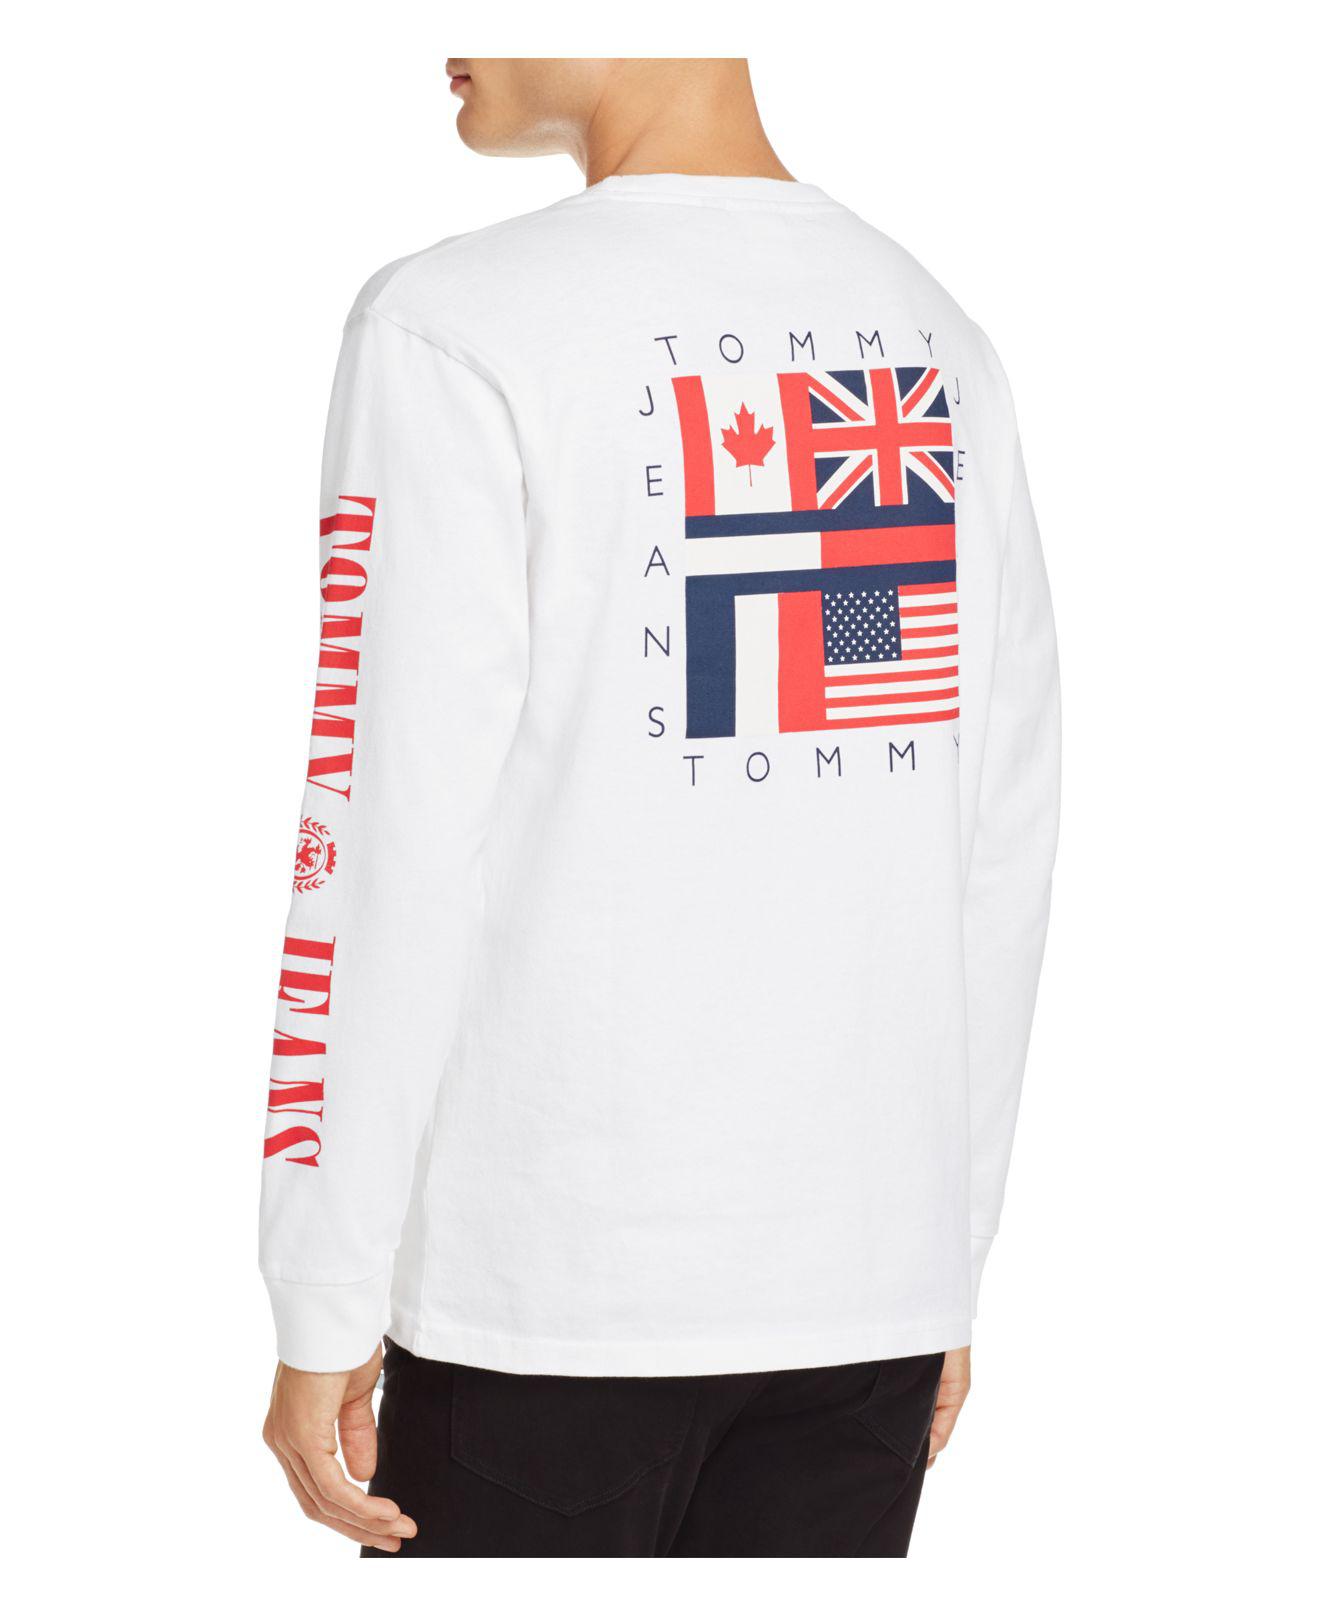 Tommy Hilfiger Denim Tommy Jeans 90's Logo Long Sleeve Crewneck Tee in  Bright White (White) for Men - Lyst